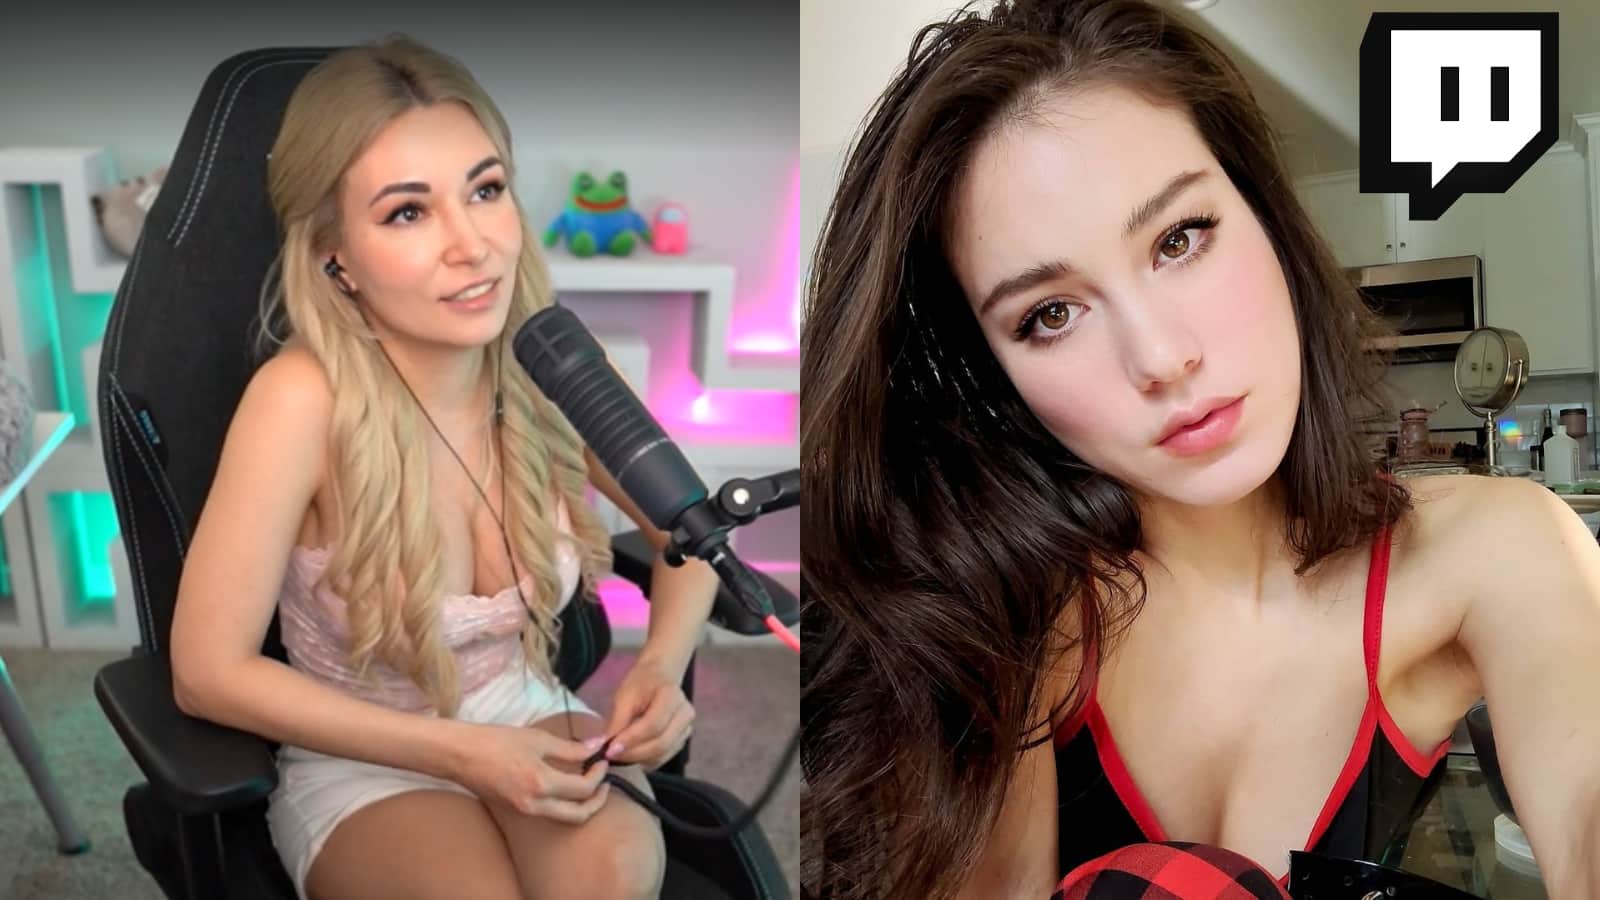 Alinity calls out Twitch over Indiefoxx